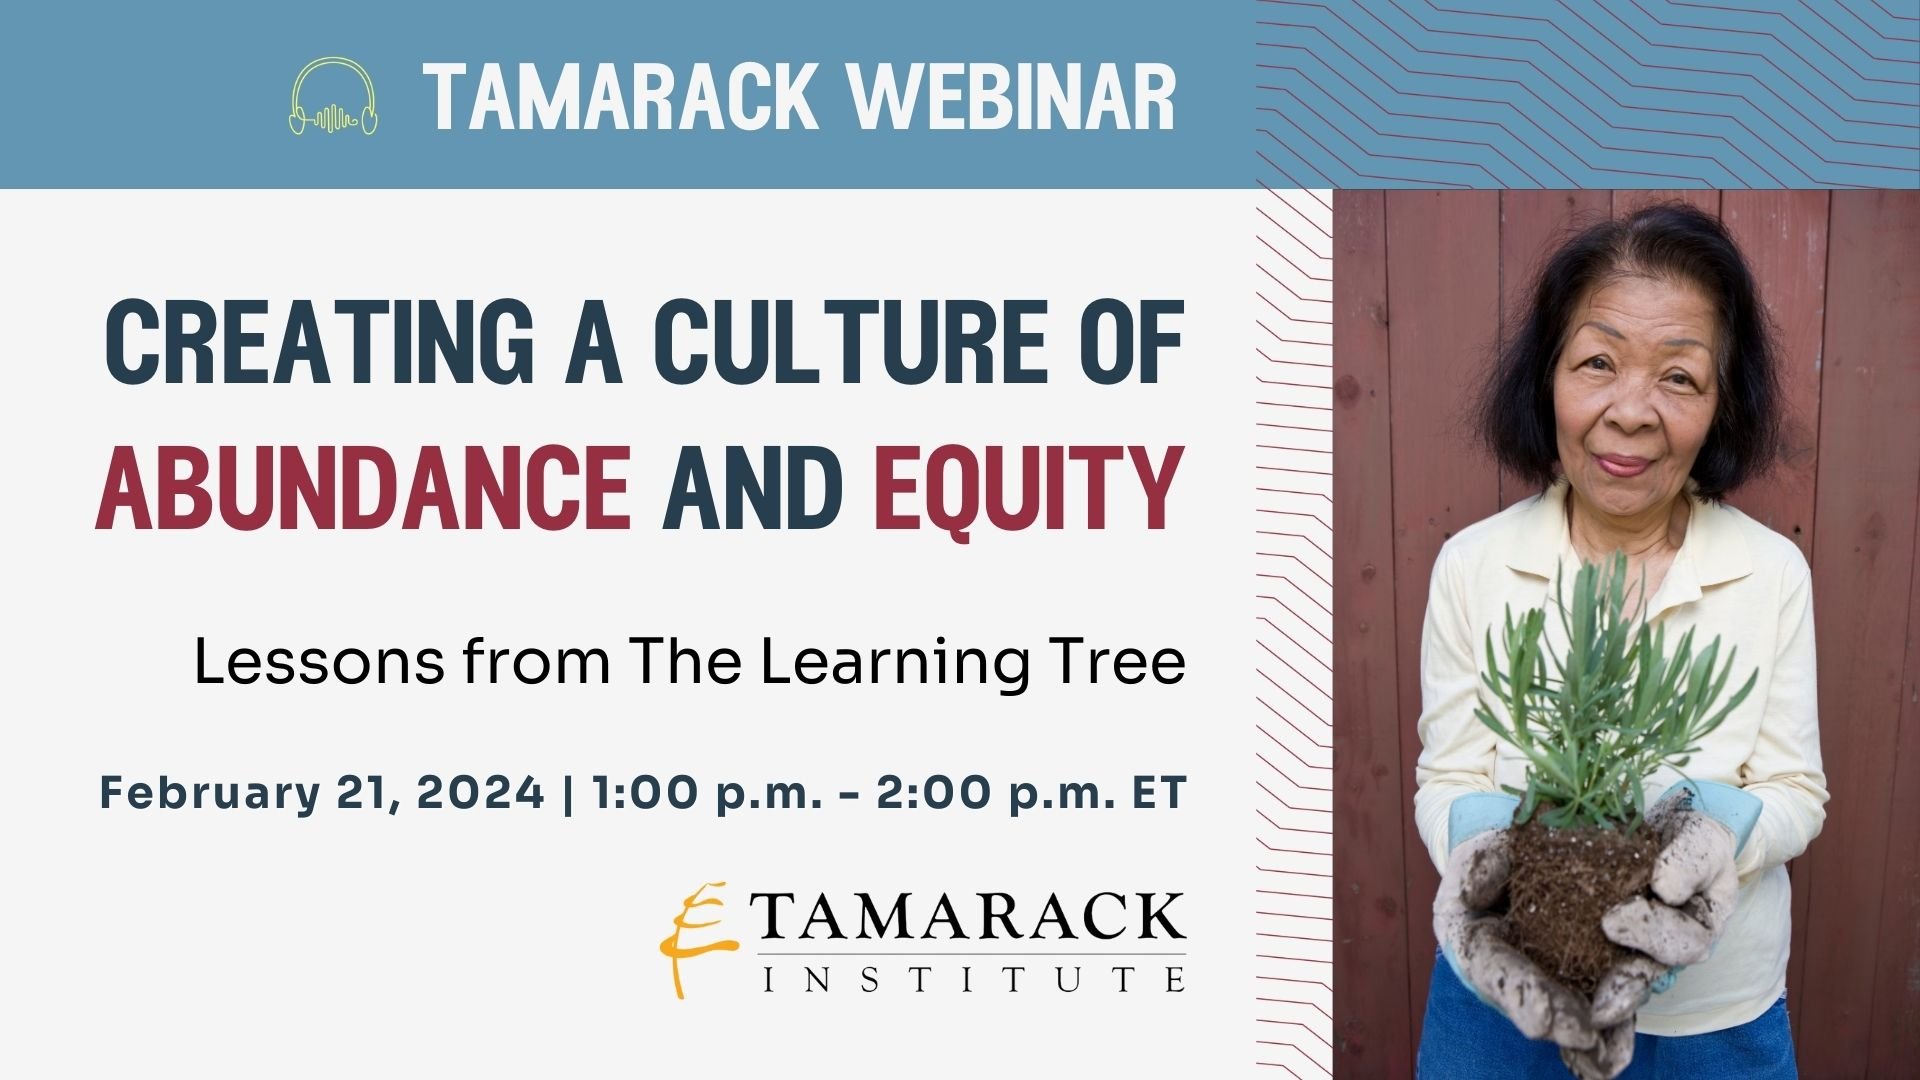 Tamarack Institute Webinar: Creating a Culture of Abundance and Equity: Lessons from the Learning Tree | February 7, 2024, from 1:00 pm. to 2:00 pm. ET